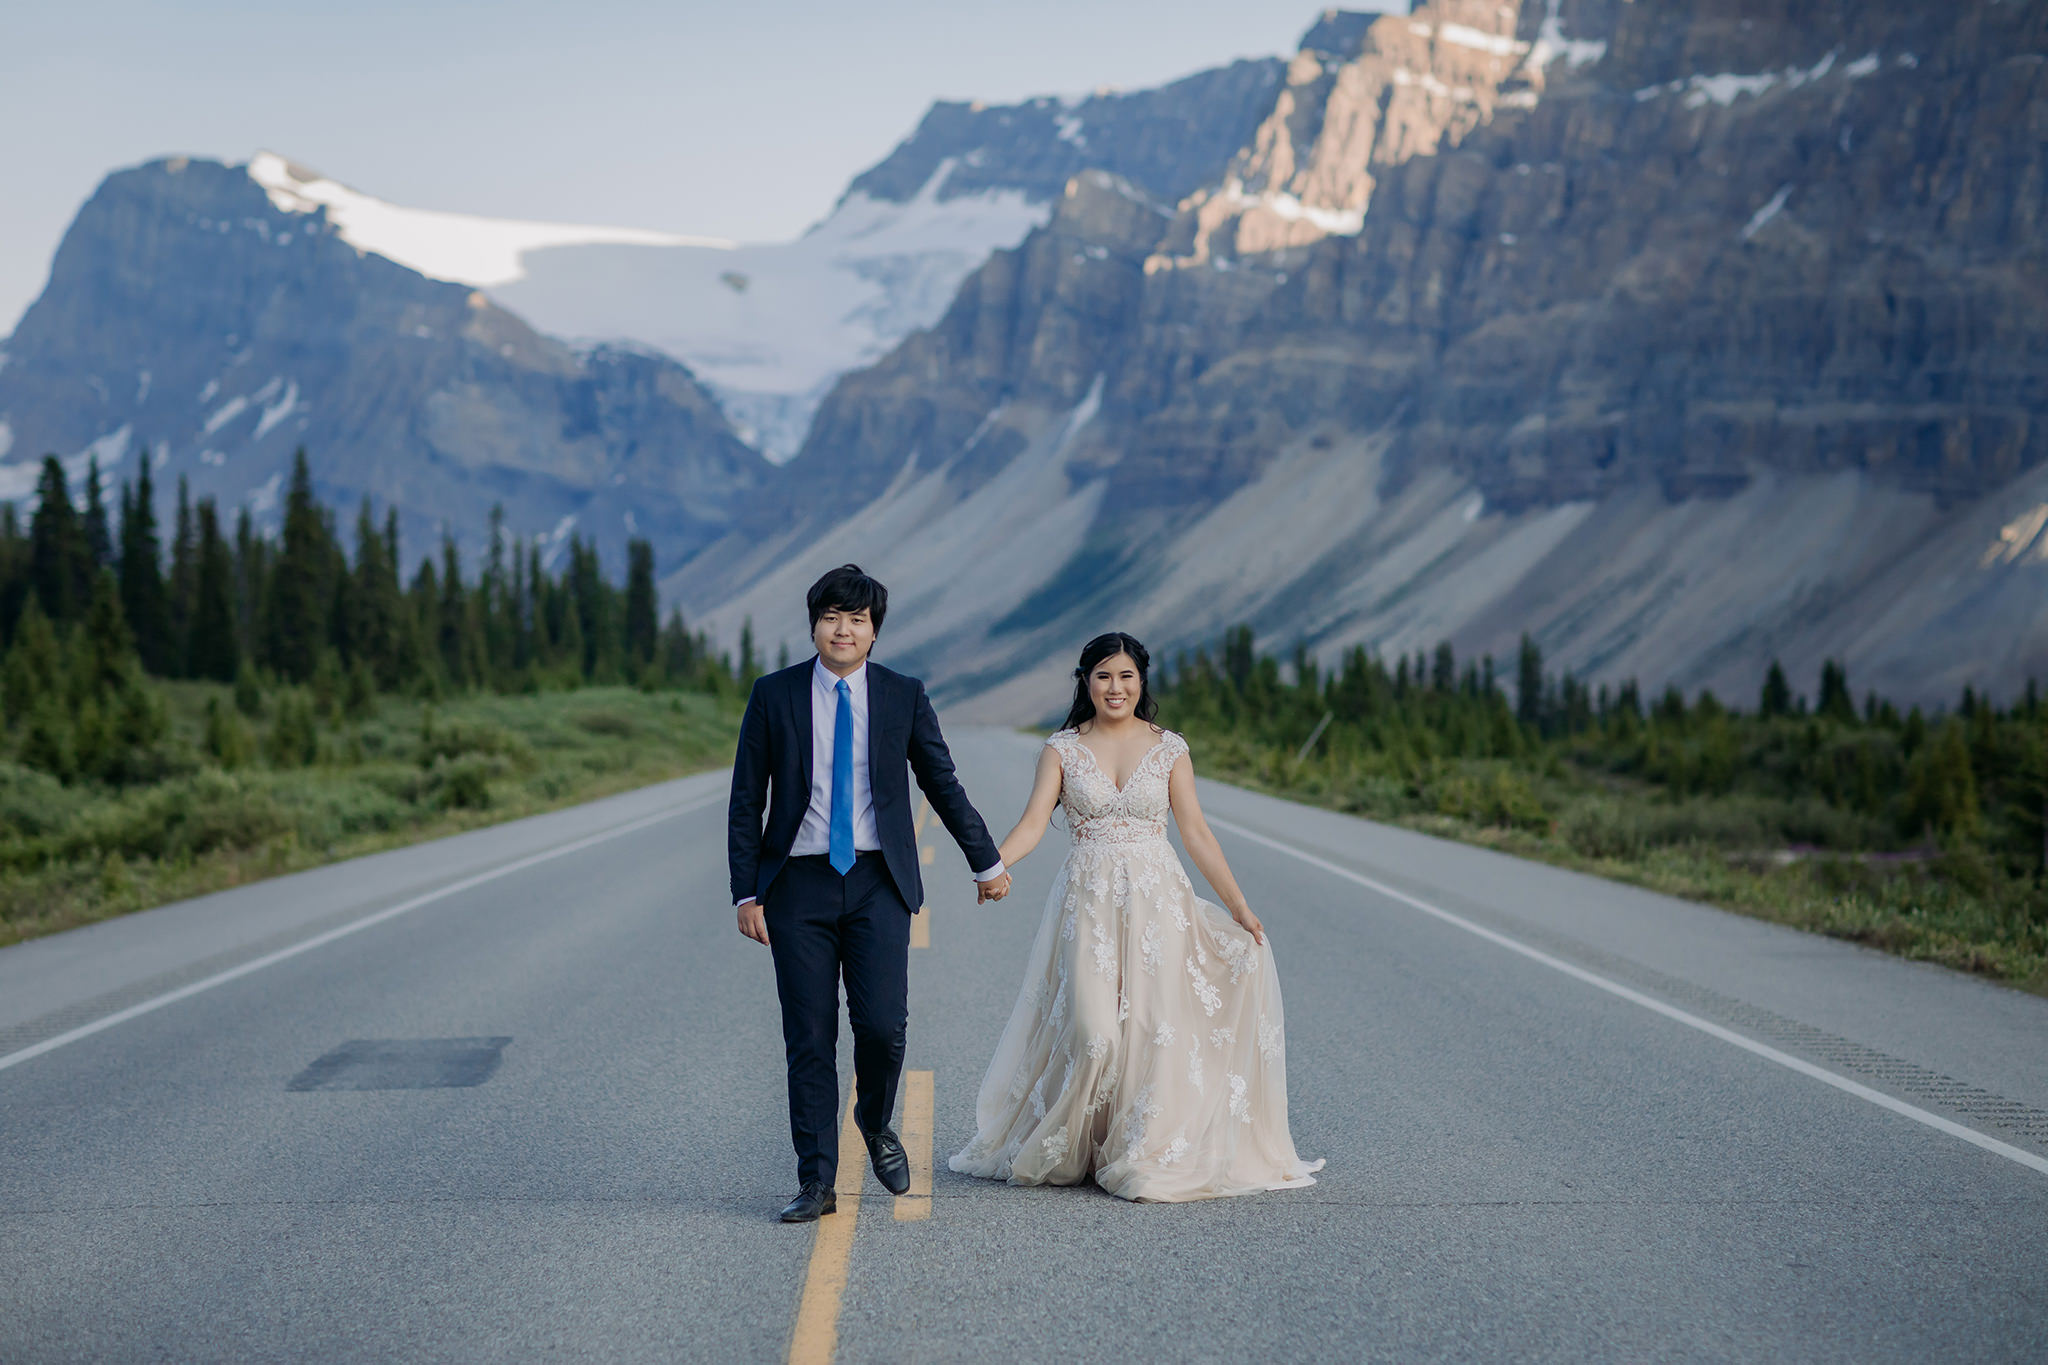 Rocky Mountain wedding tour bride groom portraits at Bow Lake on Icefields near sunset in Banff National Park photographed by mountain elopement specialist ENV Photography